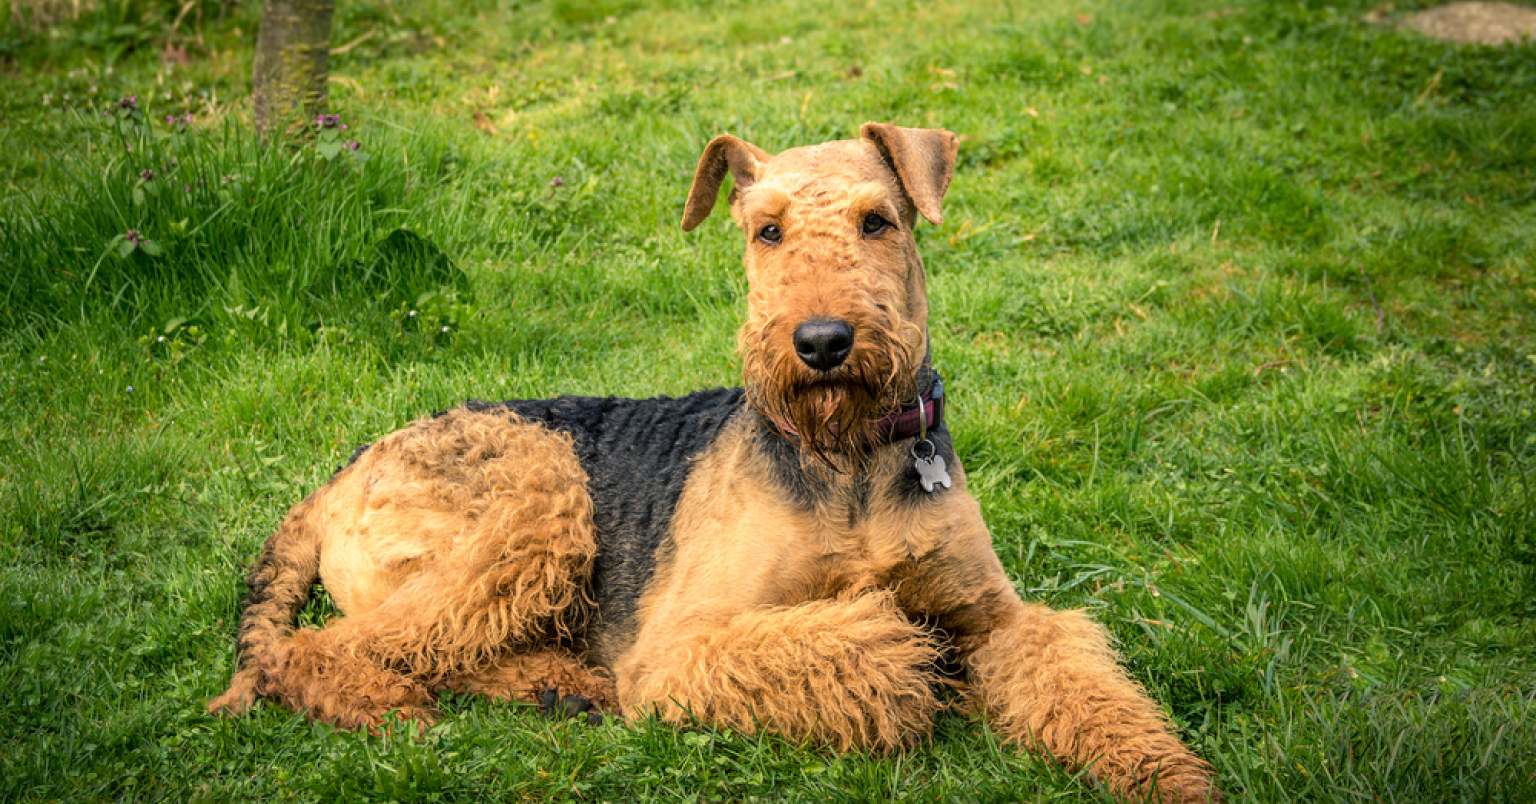 Photograph of an Airedale Terrier laying on green grass